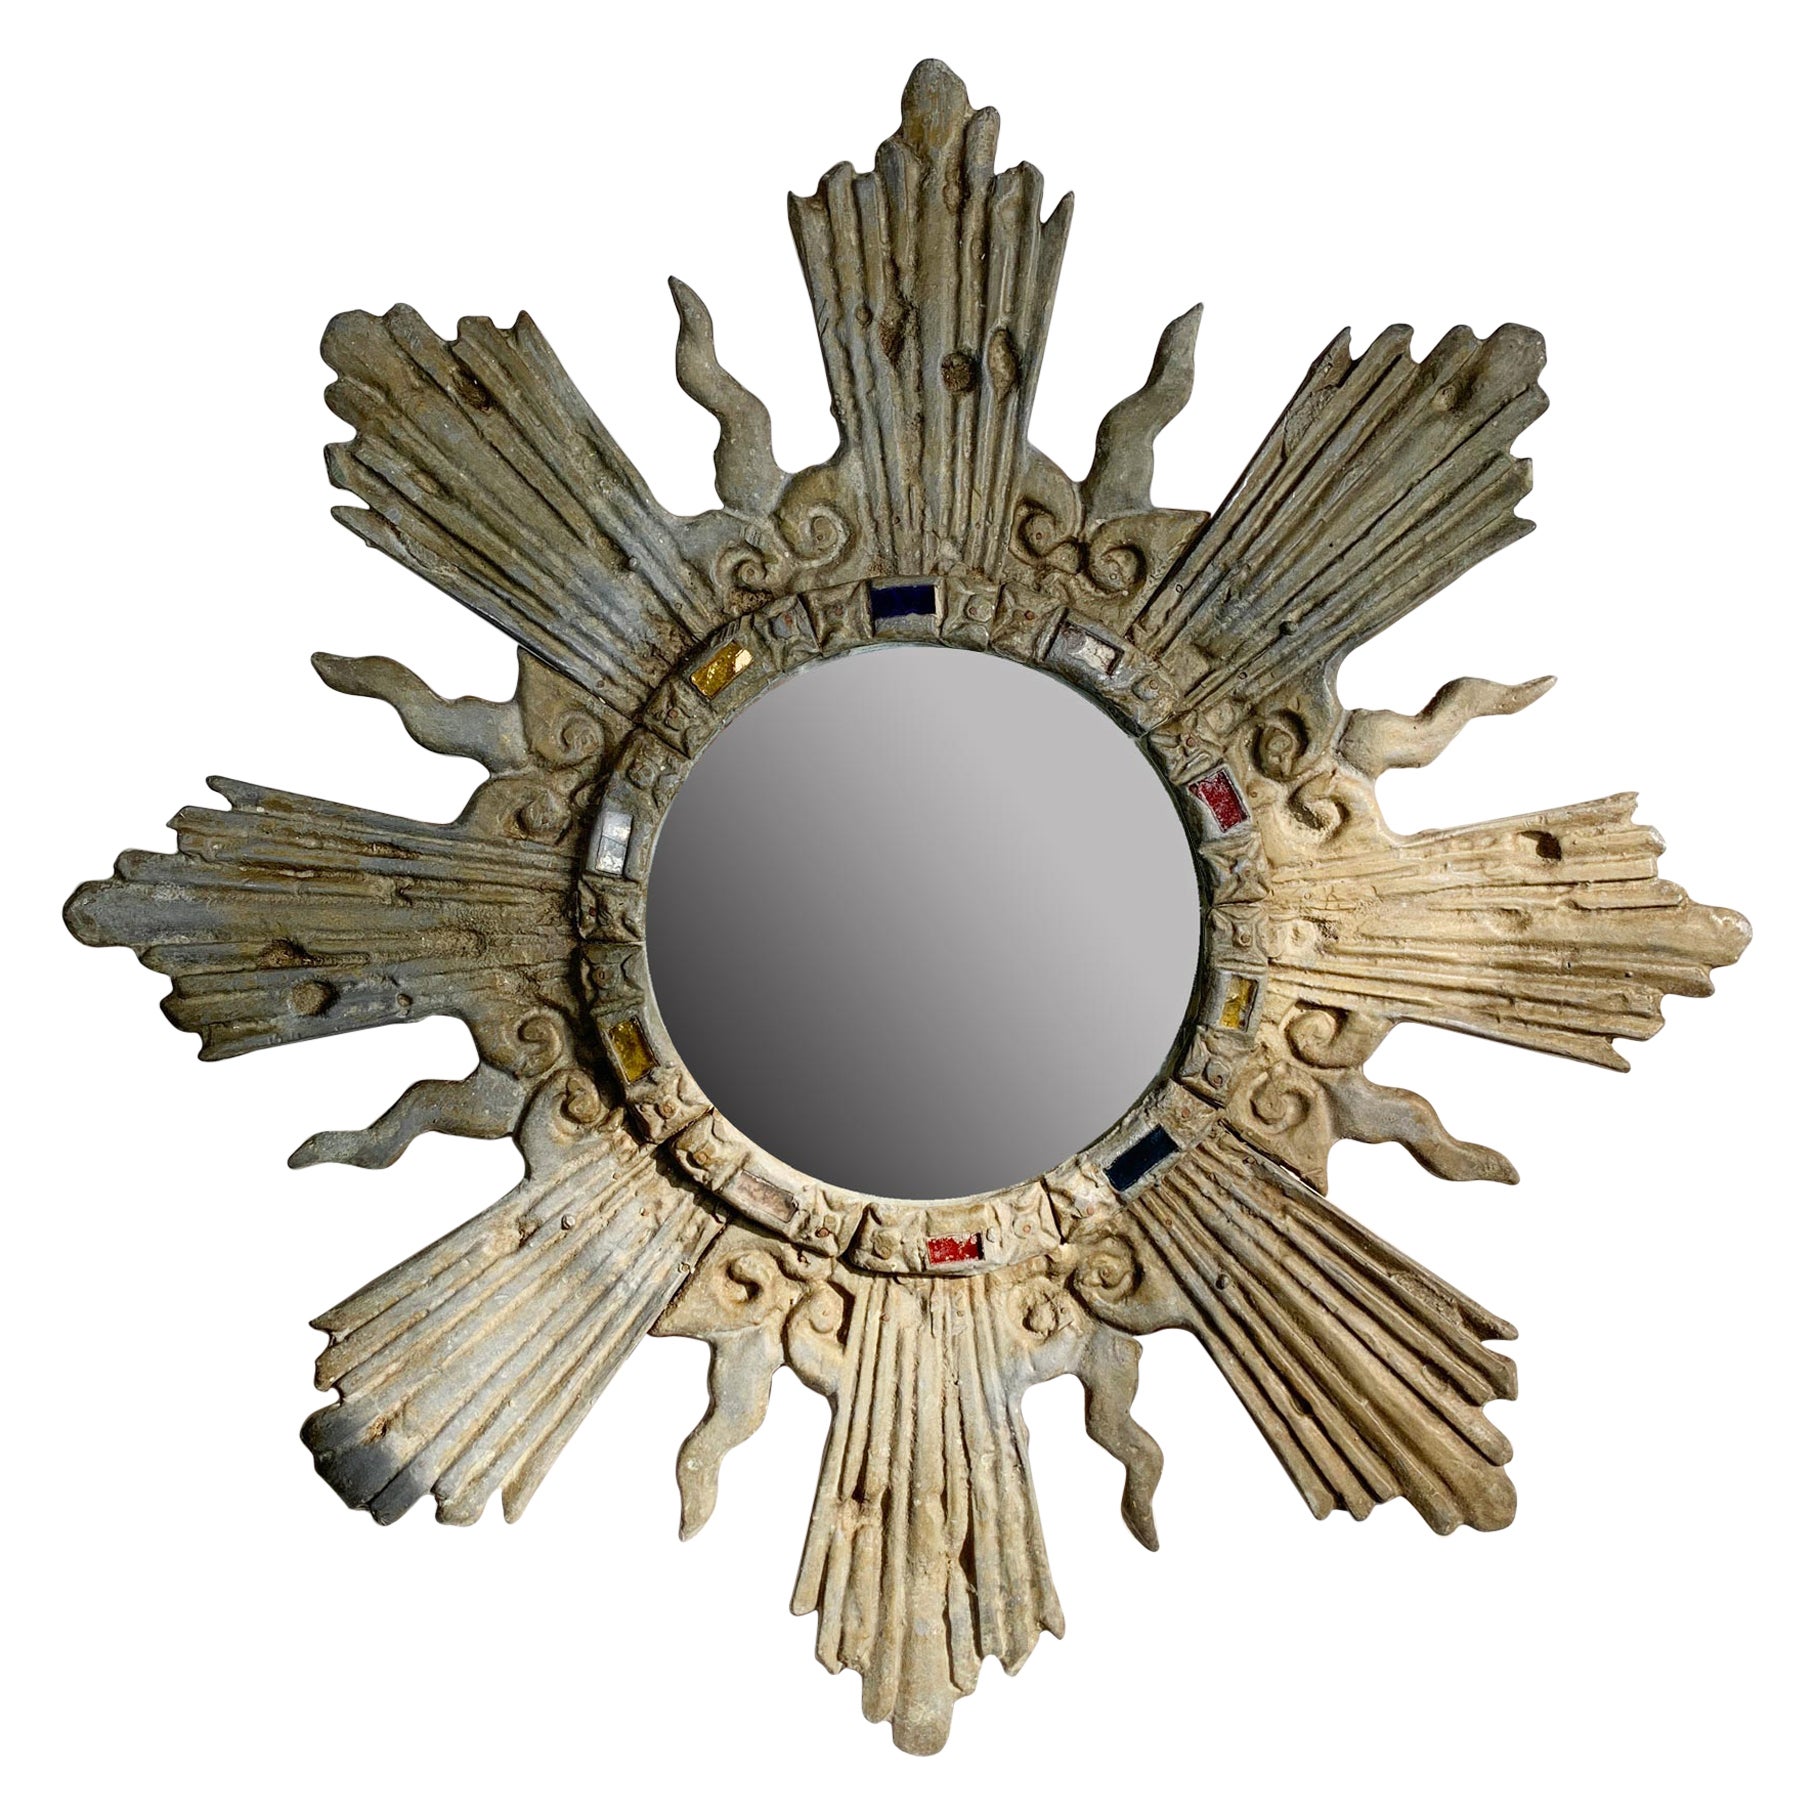 Early 20th Century Lead Sunburst Mirror in the Manner of Line Vautrin